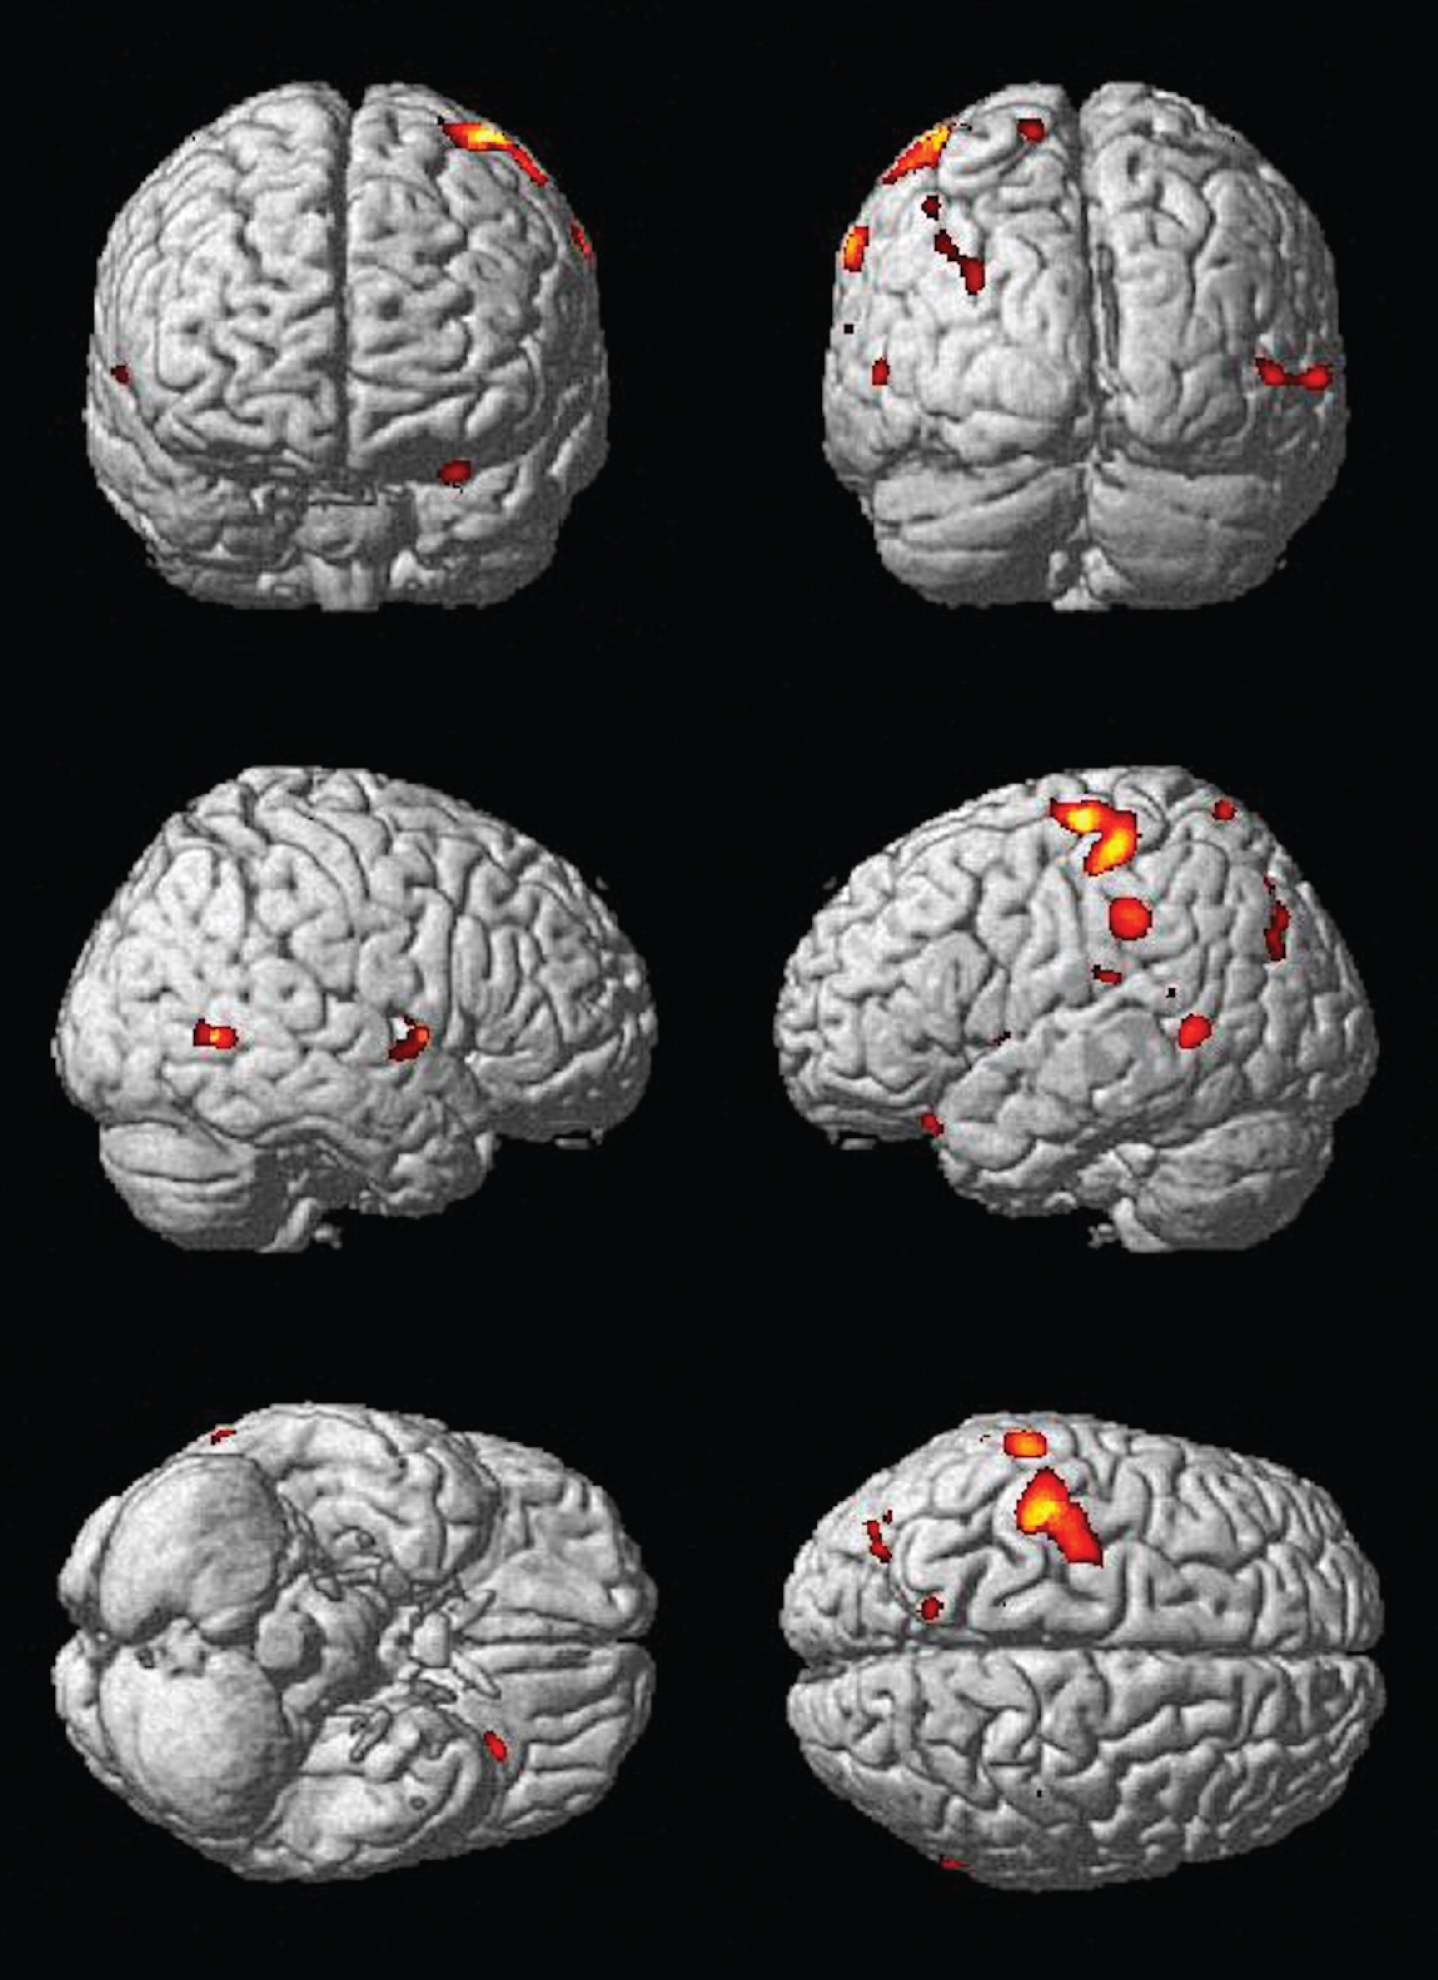 Main effect of change in physical activity over time on gray matter structure. Areas that demonstrated more gray matter volume with increased physical activity over time include the left inferior orbital frontal cortex (–29, 25, –23) and left precuneus (–13, –63, 71).